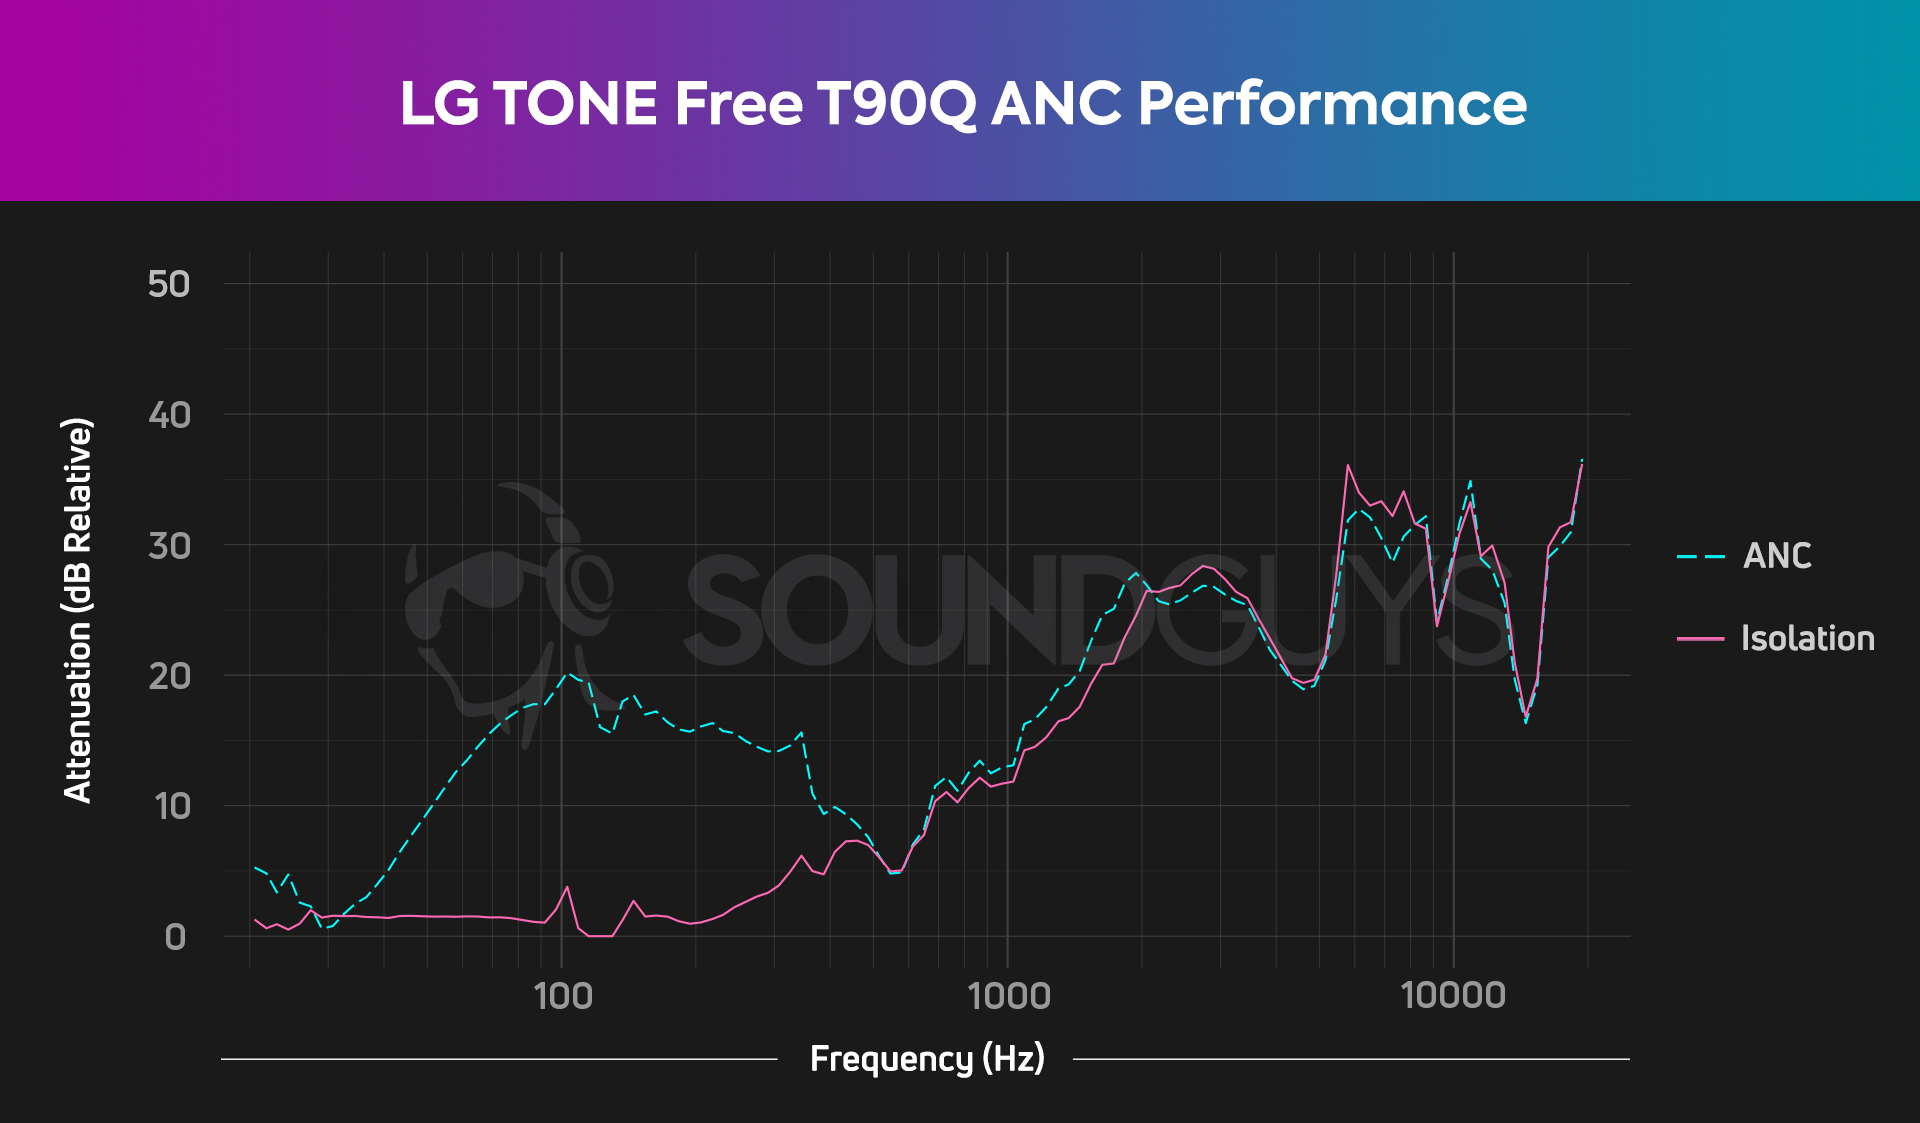 The attenuation chart for the LG TONE Free T90.